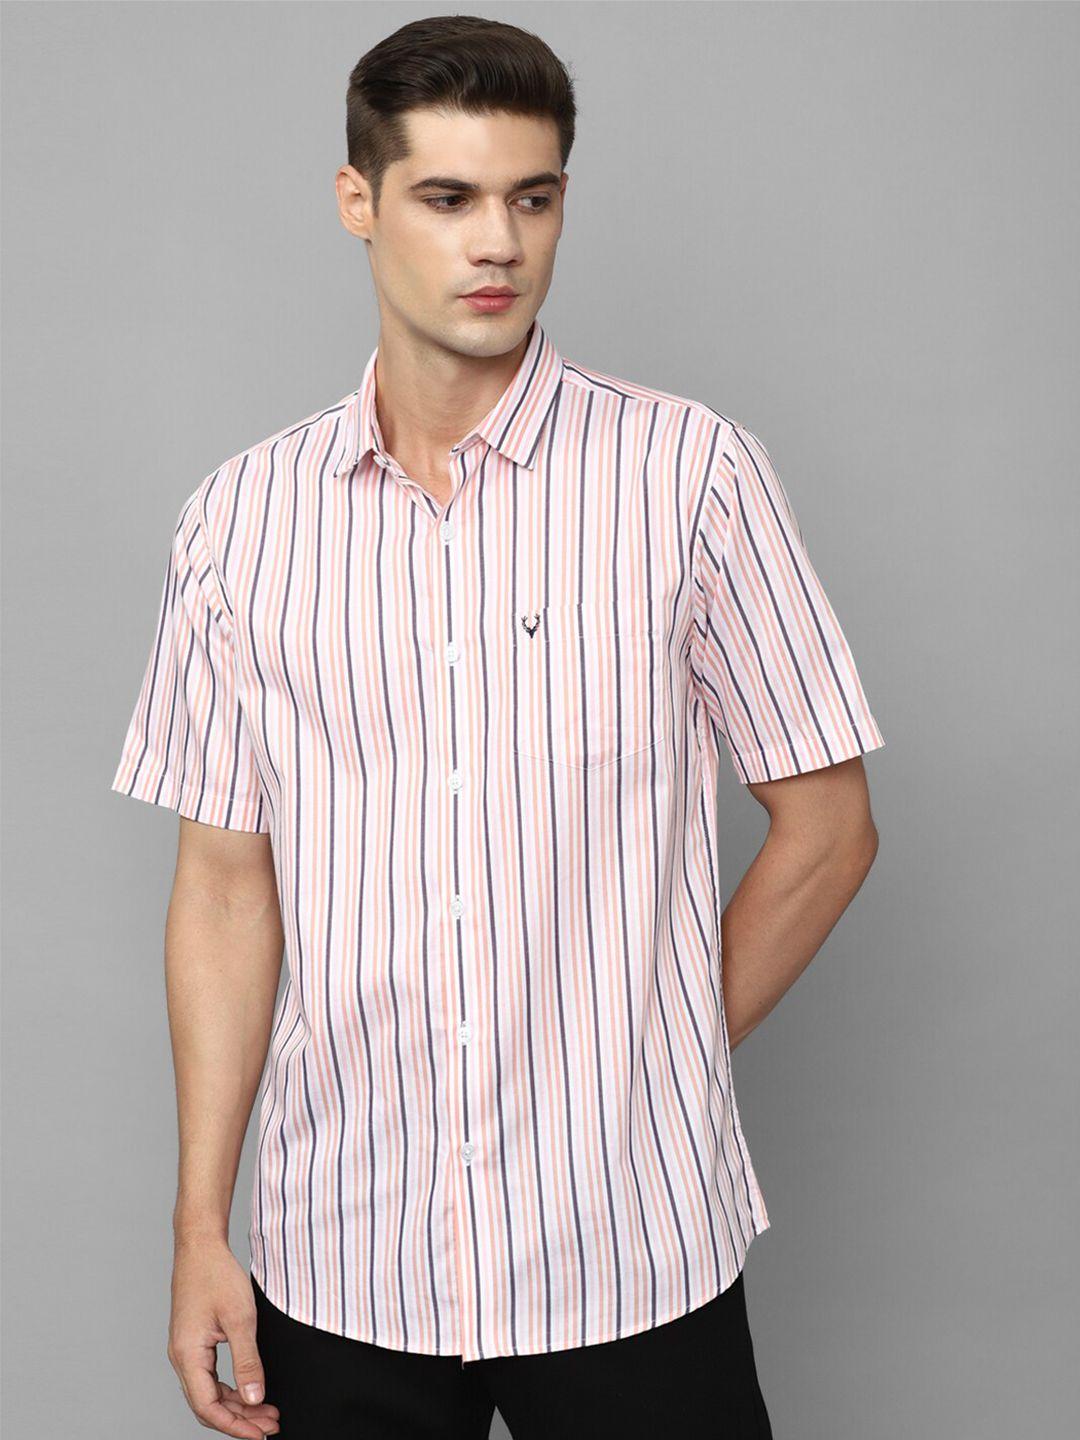 allen solly slim fit opaque striped pure cotton casual shirt